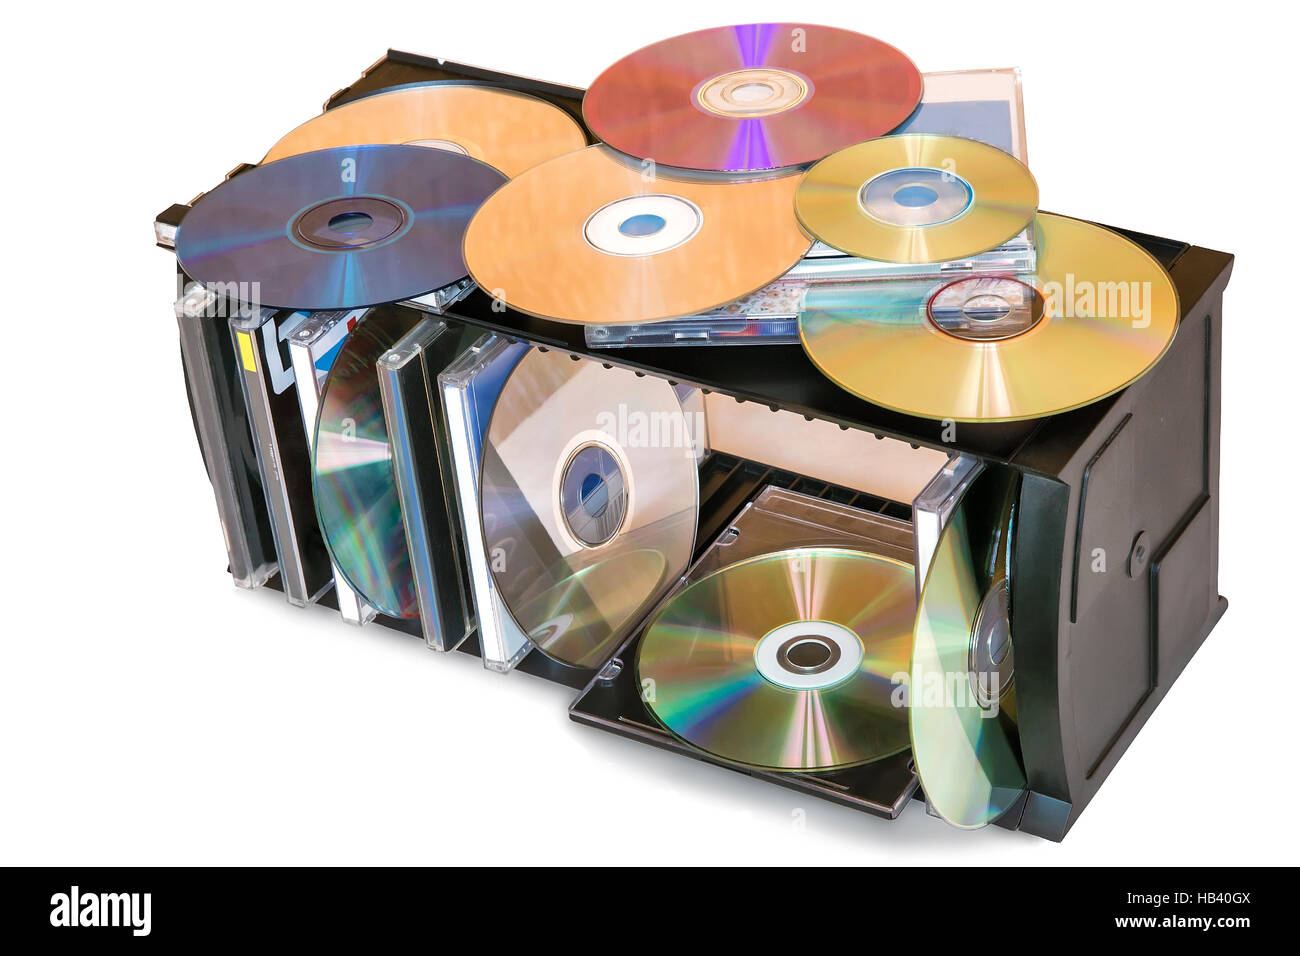 Compact discs in the storage container. Stock Photo